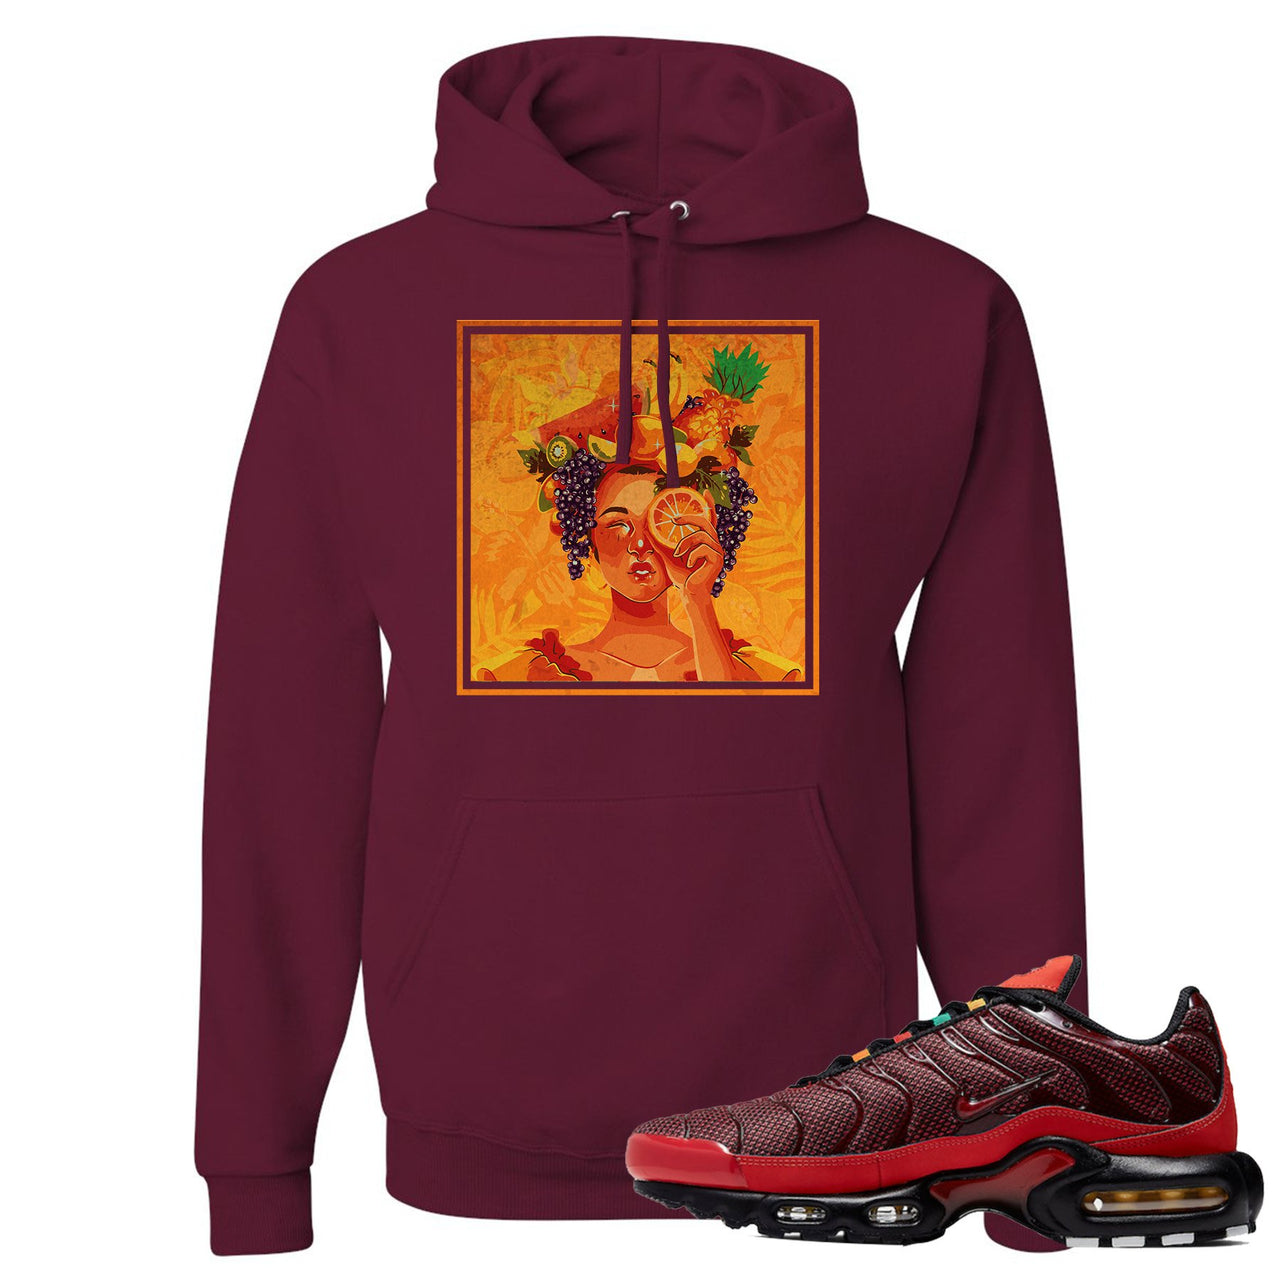 printed on the front of the nike air max plus sneaker matching maroon pullover hoodie is the lady fruit logo